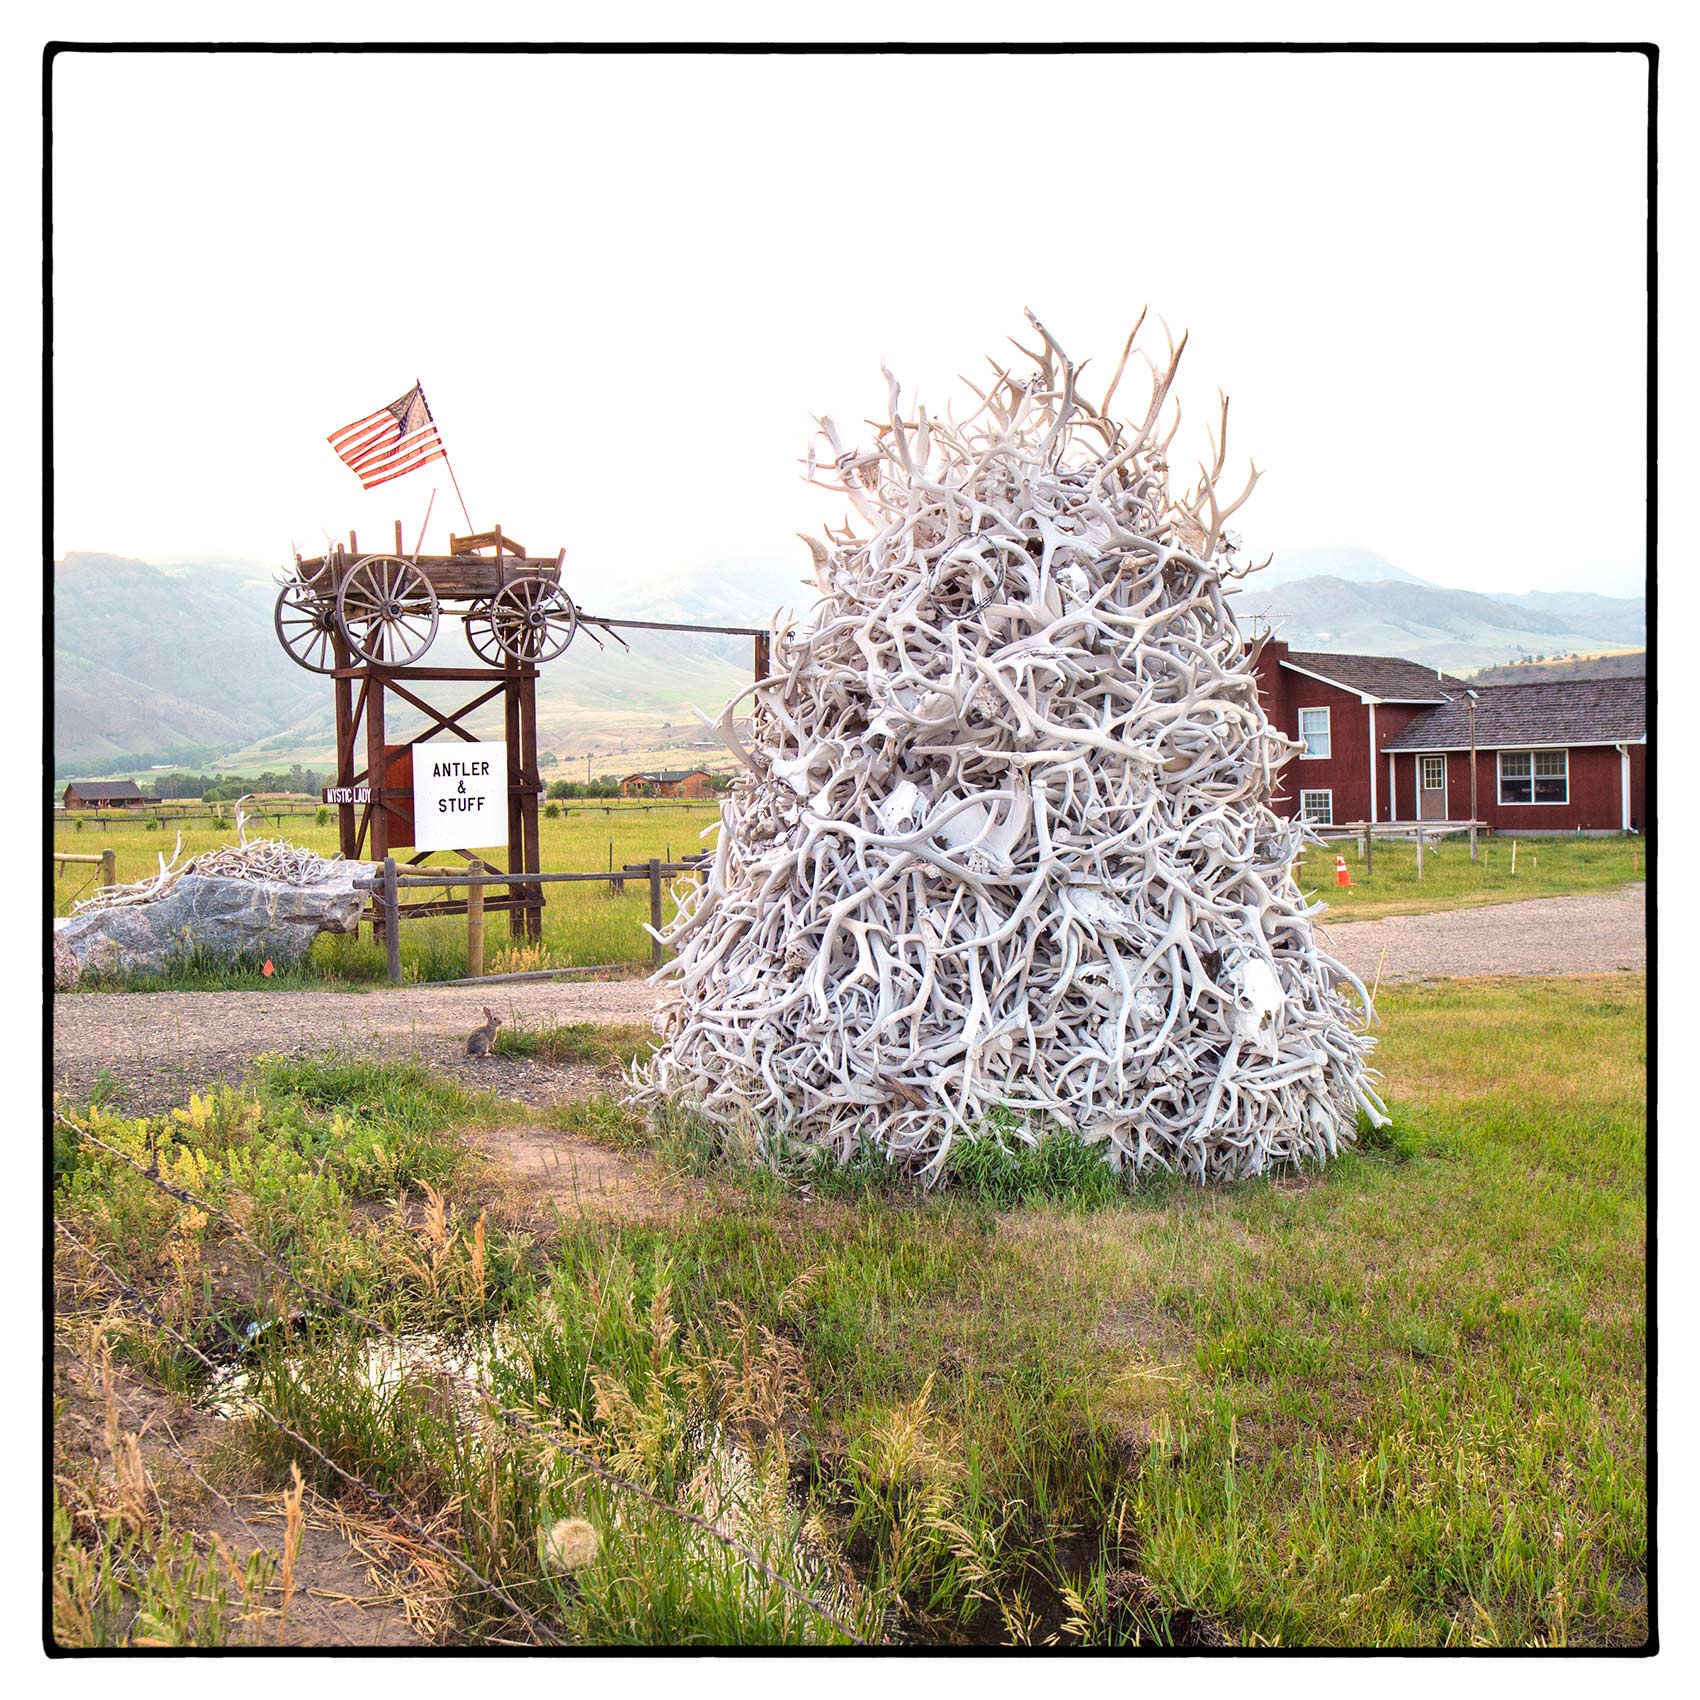 a-mound-of-deer-antlers-sits-outside-a-house-in-rural-wyoming